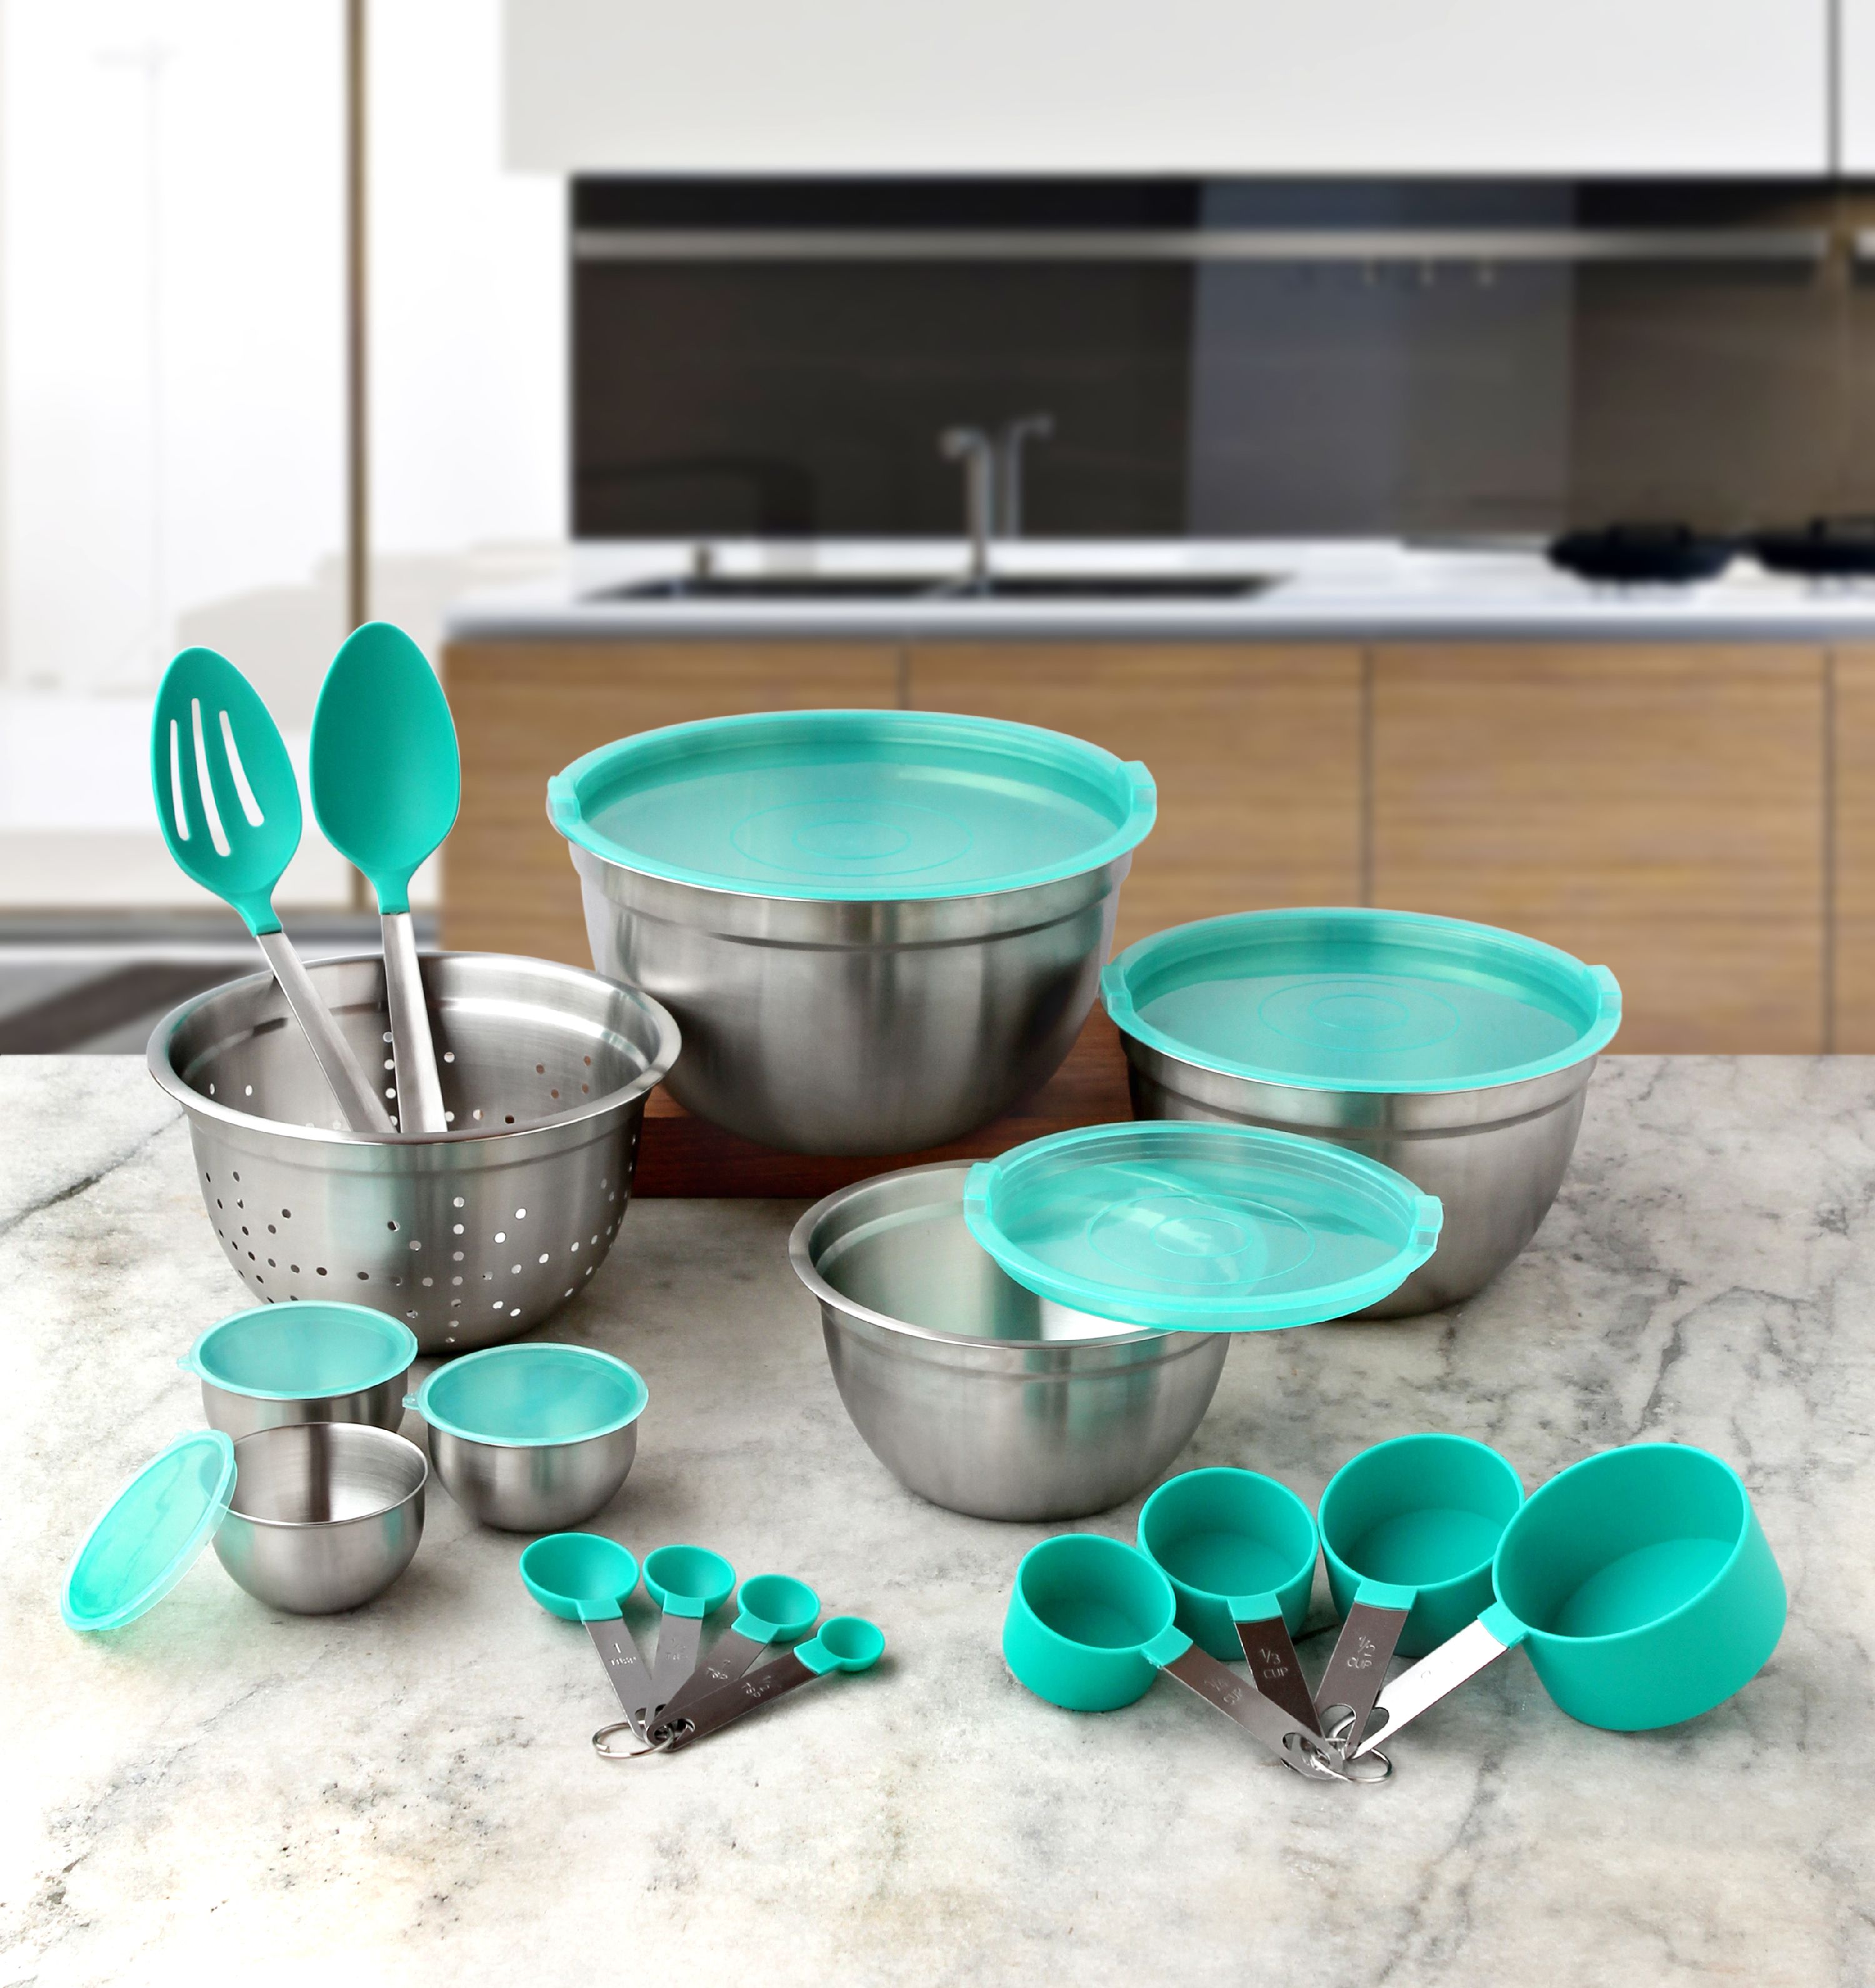 Better Homes & Gardens Teal Gadget and Utensil Set, 23 Piece - image 2 of 7